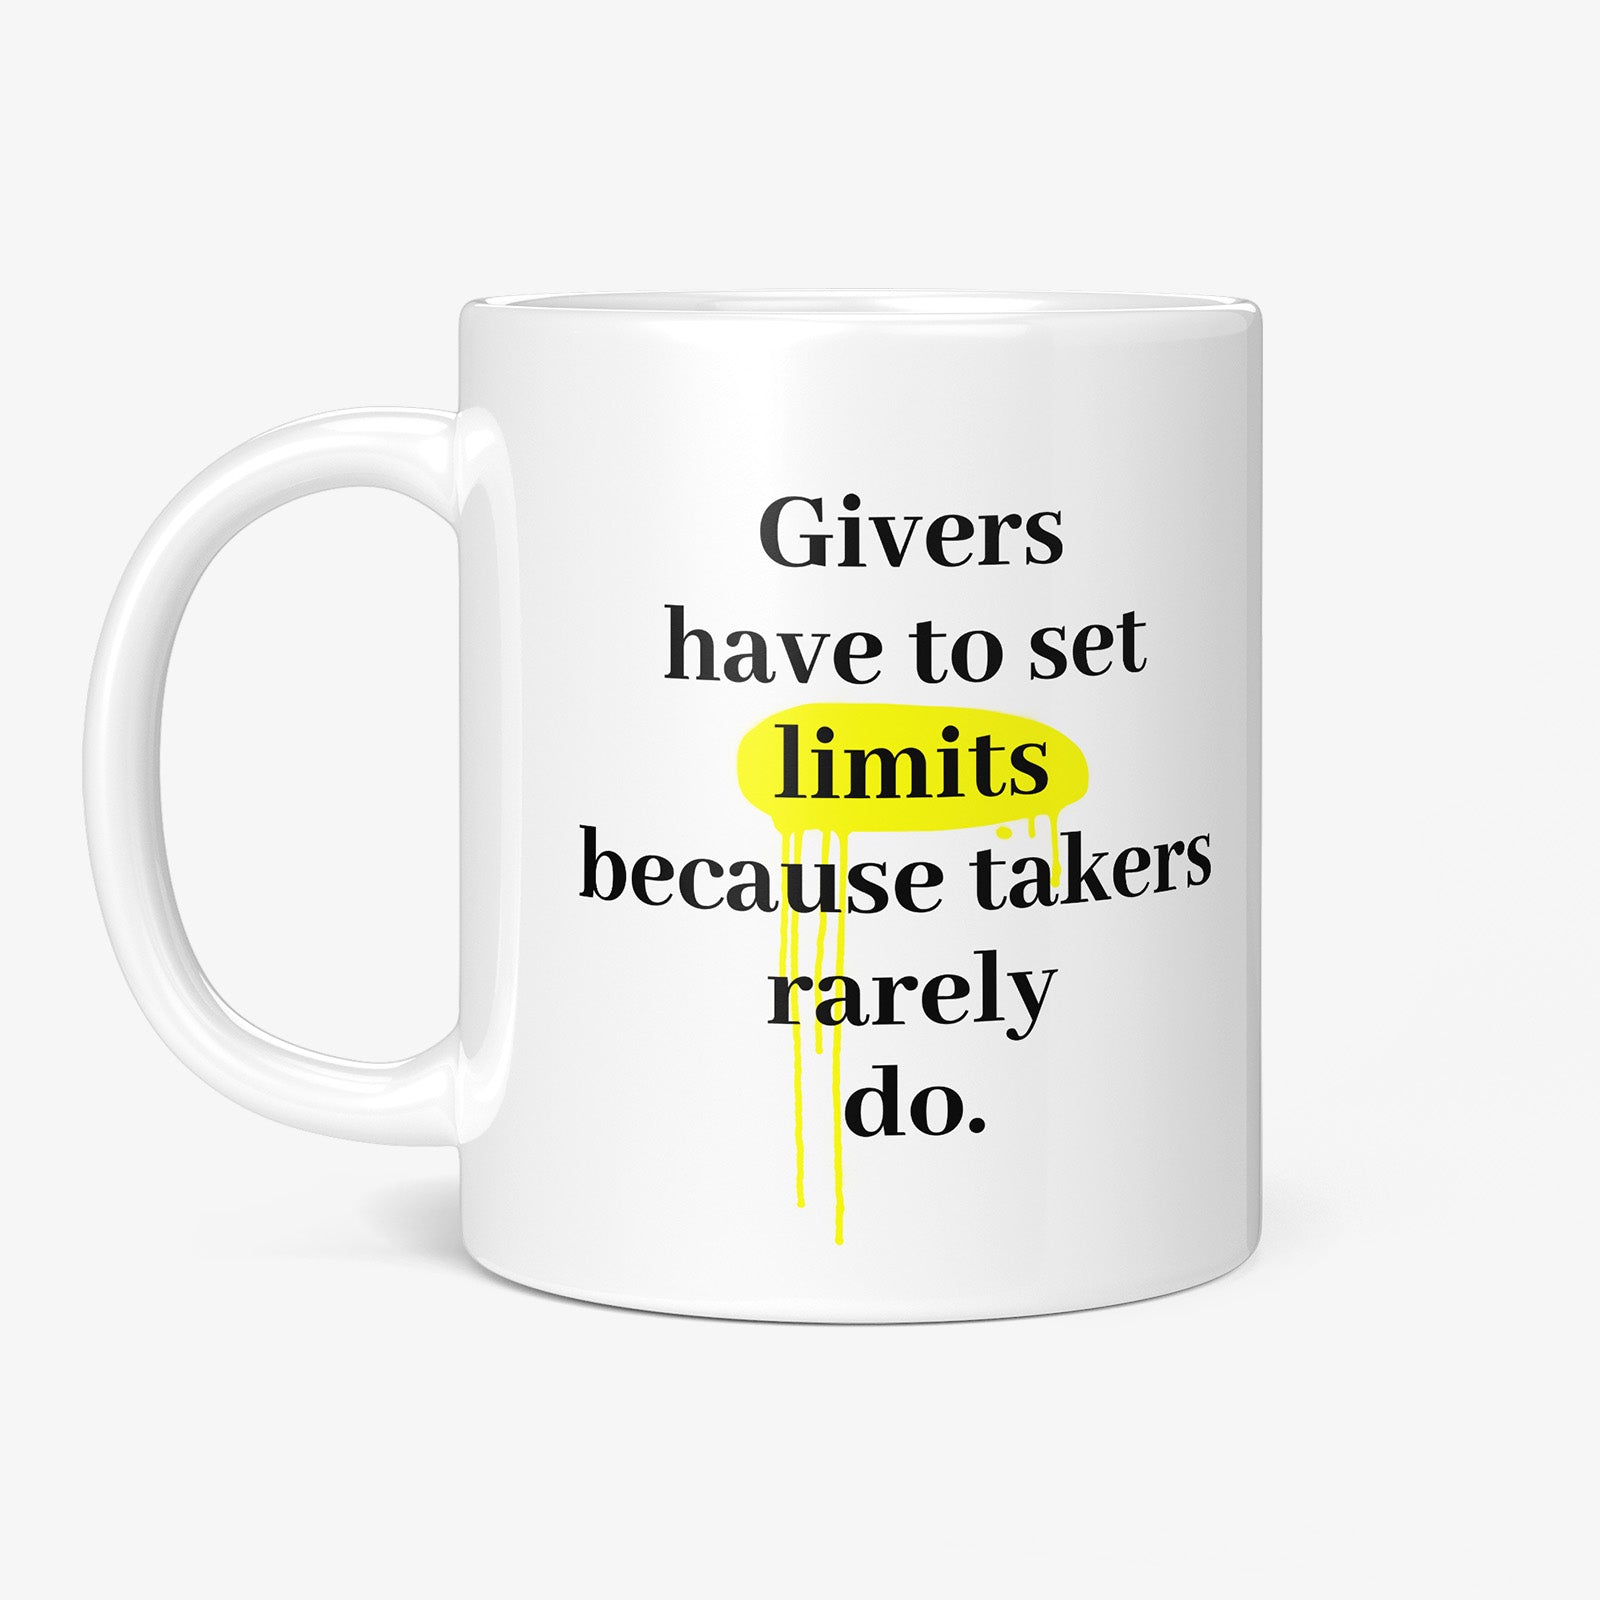 Be inspired by Henry Ford's famous quote, "Givers have to set limits because takers rarely do" on this white and glossy 11oz coffee mug with the handle on the left.